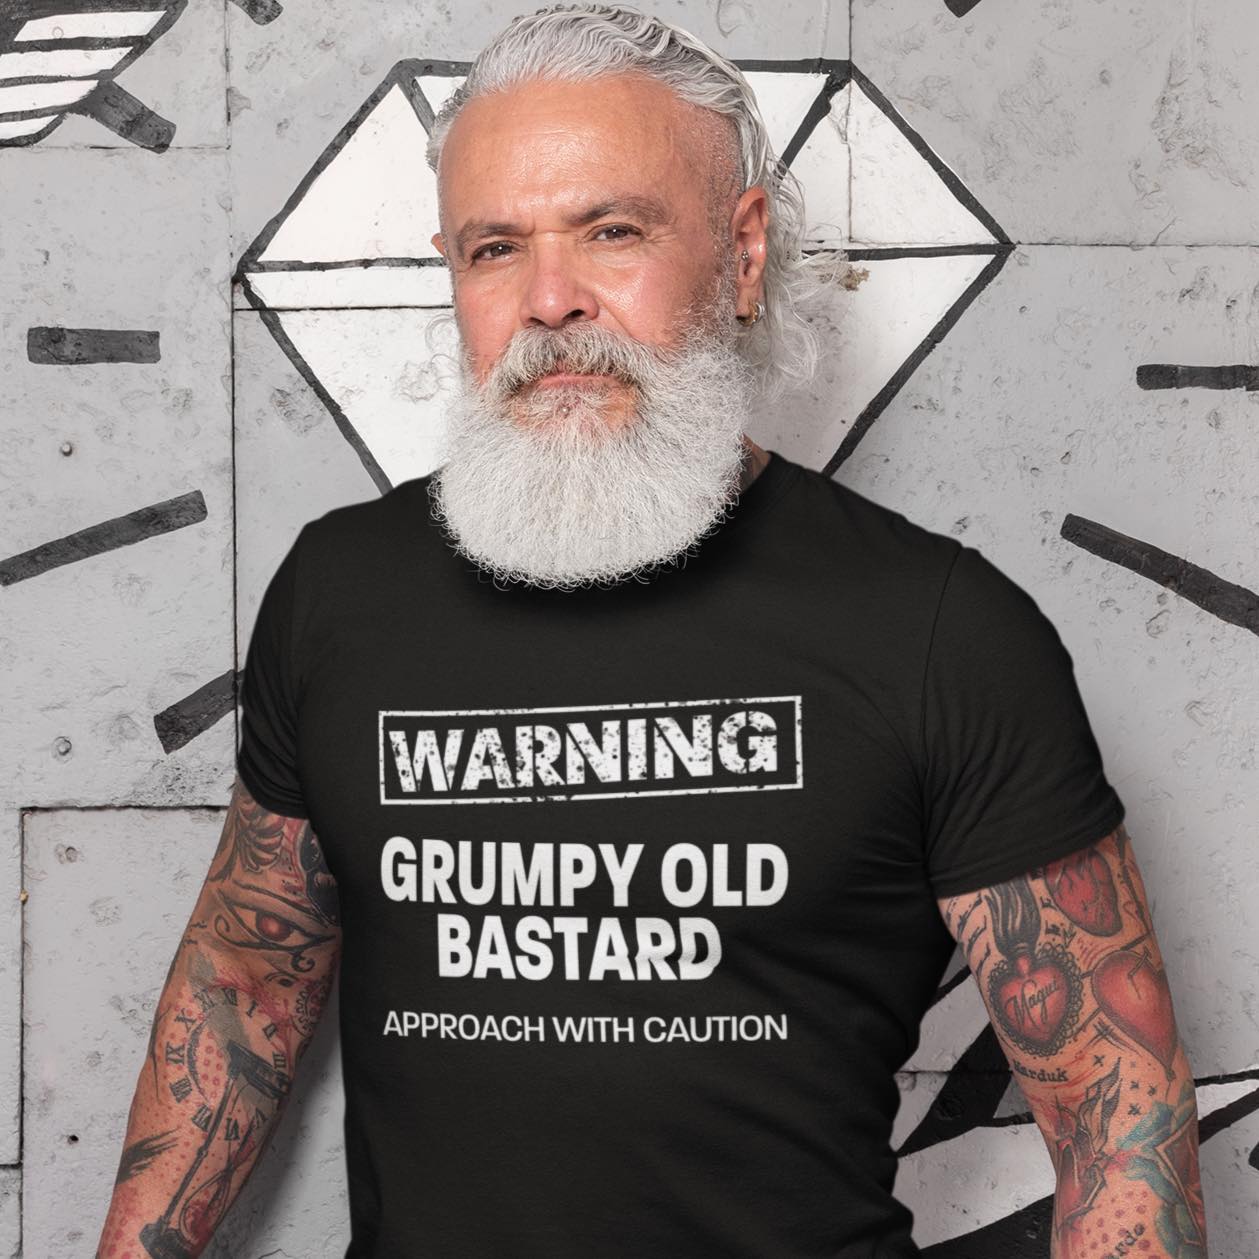 Warning grumpy old bastard approach with caution